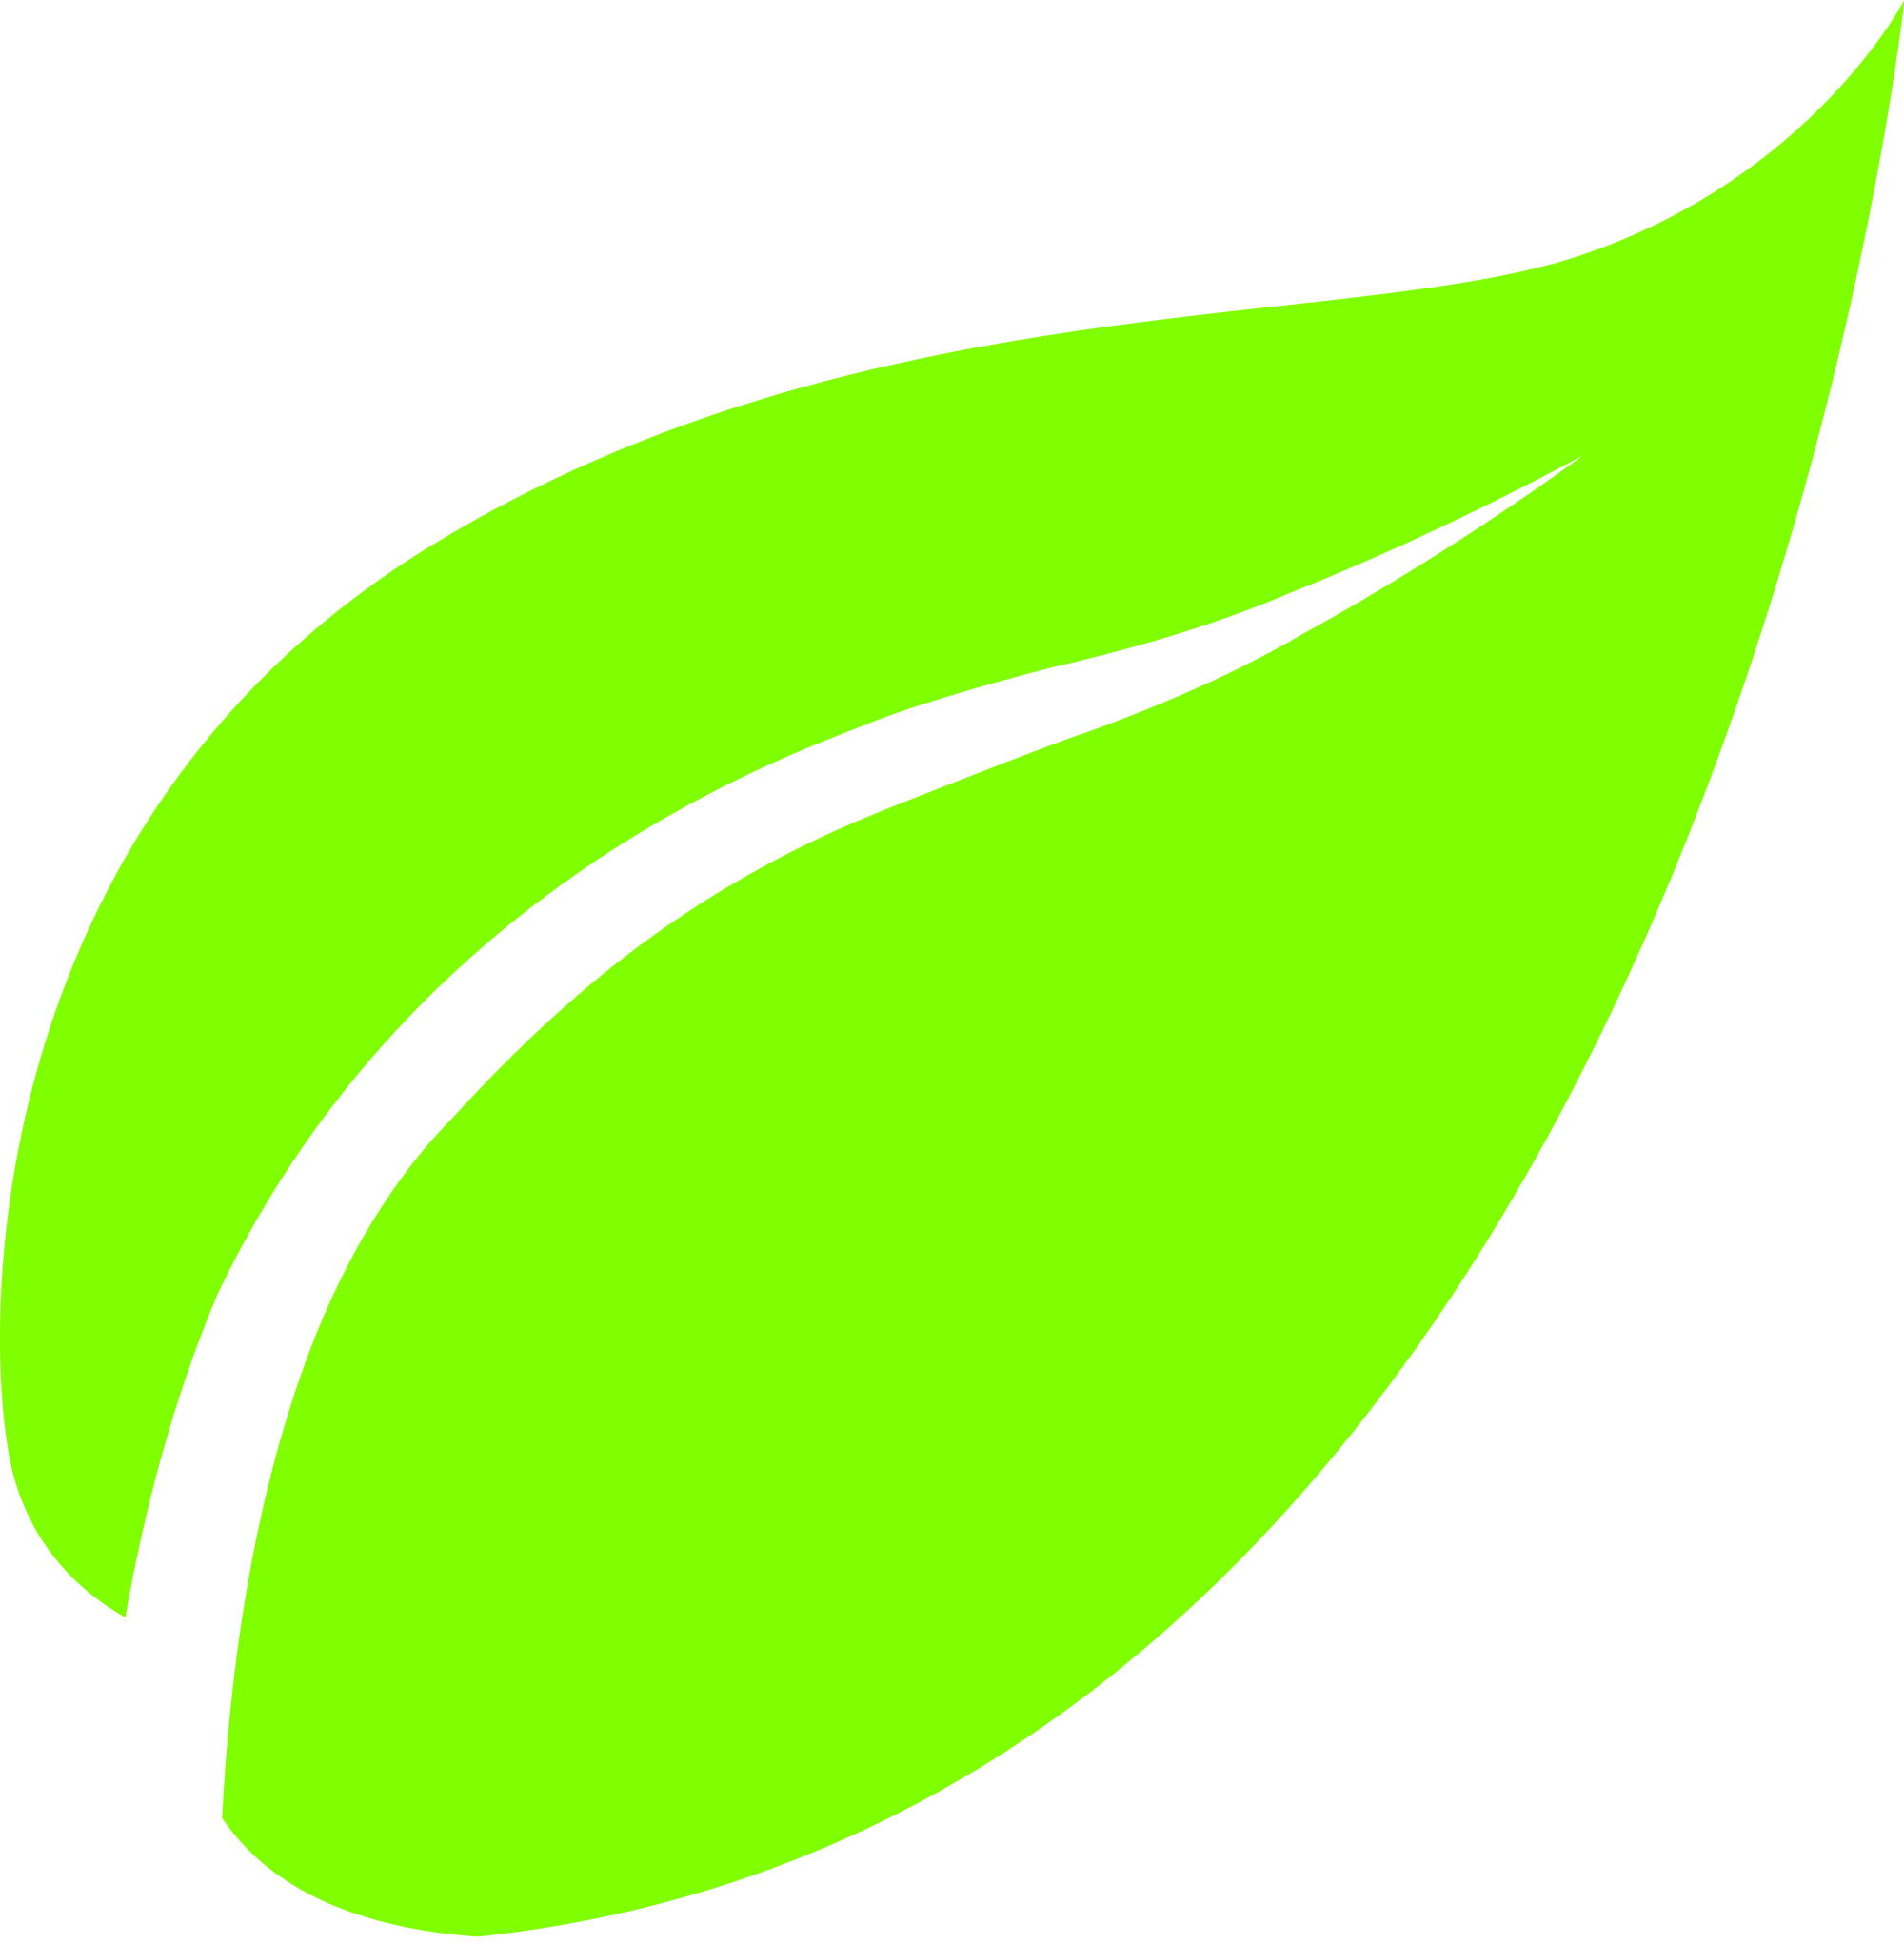 Icon svg wikimedia commons. Clipart leaf file